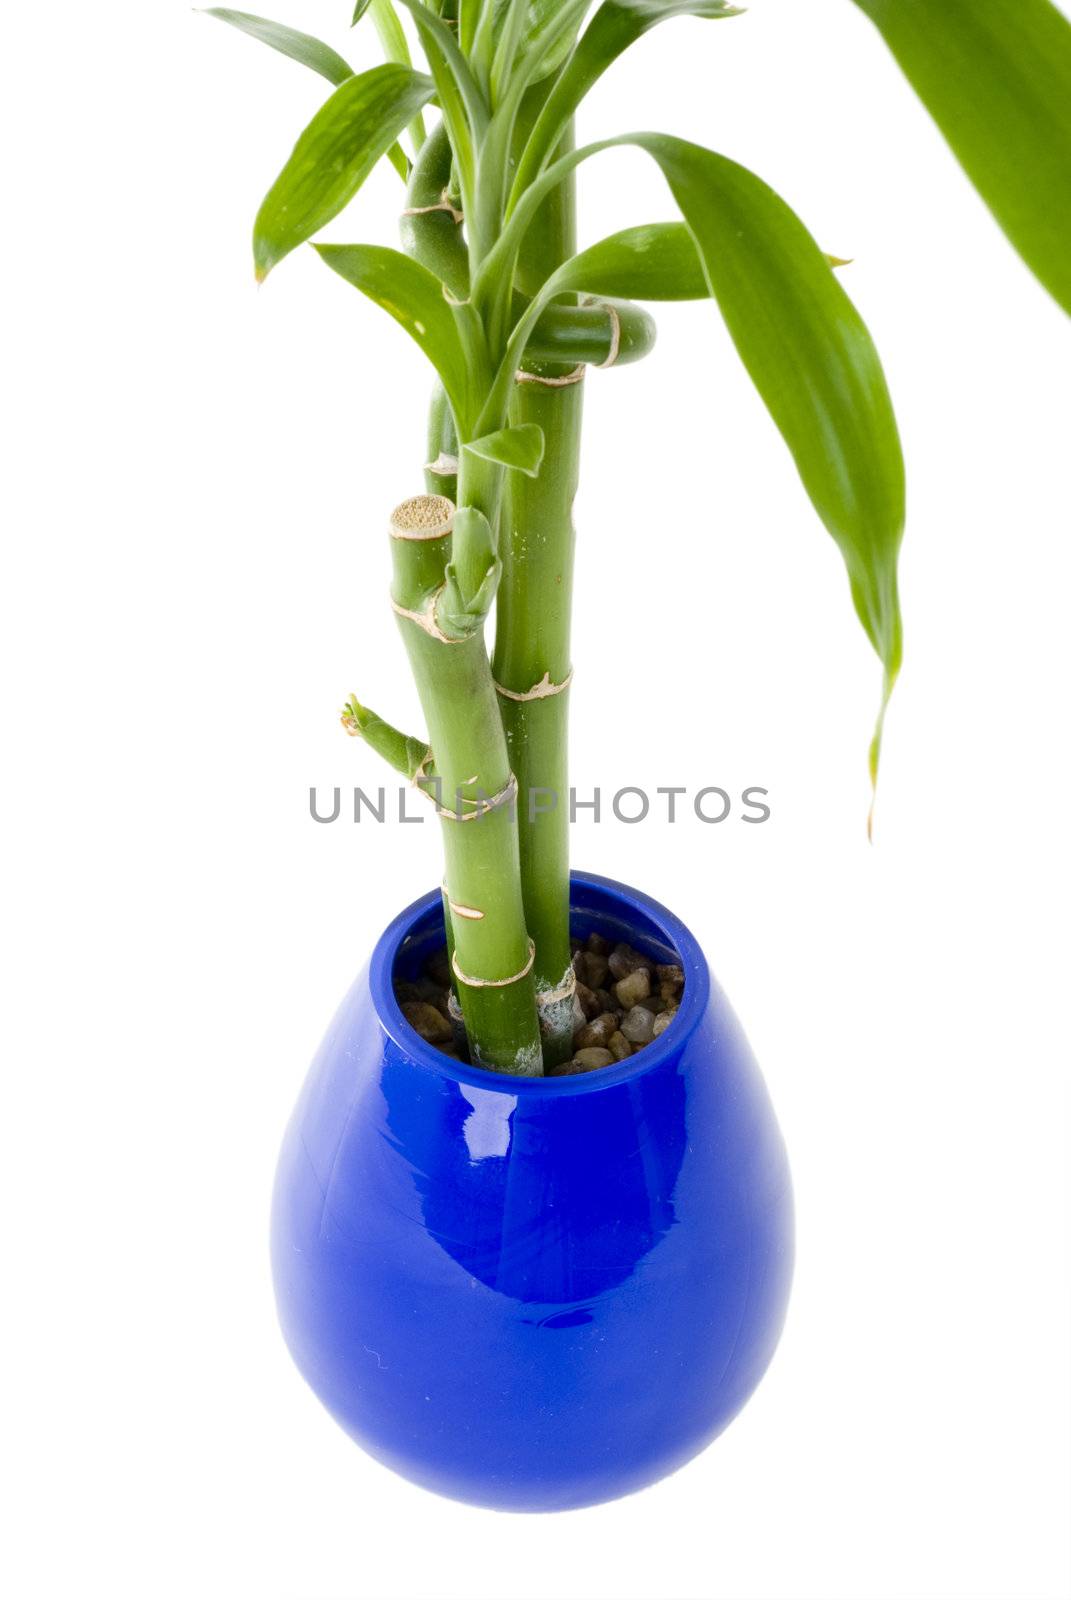 Plant in a pot by eugenef